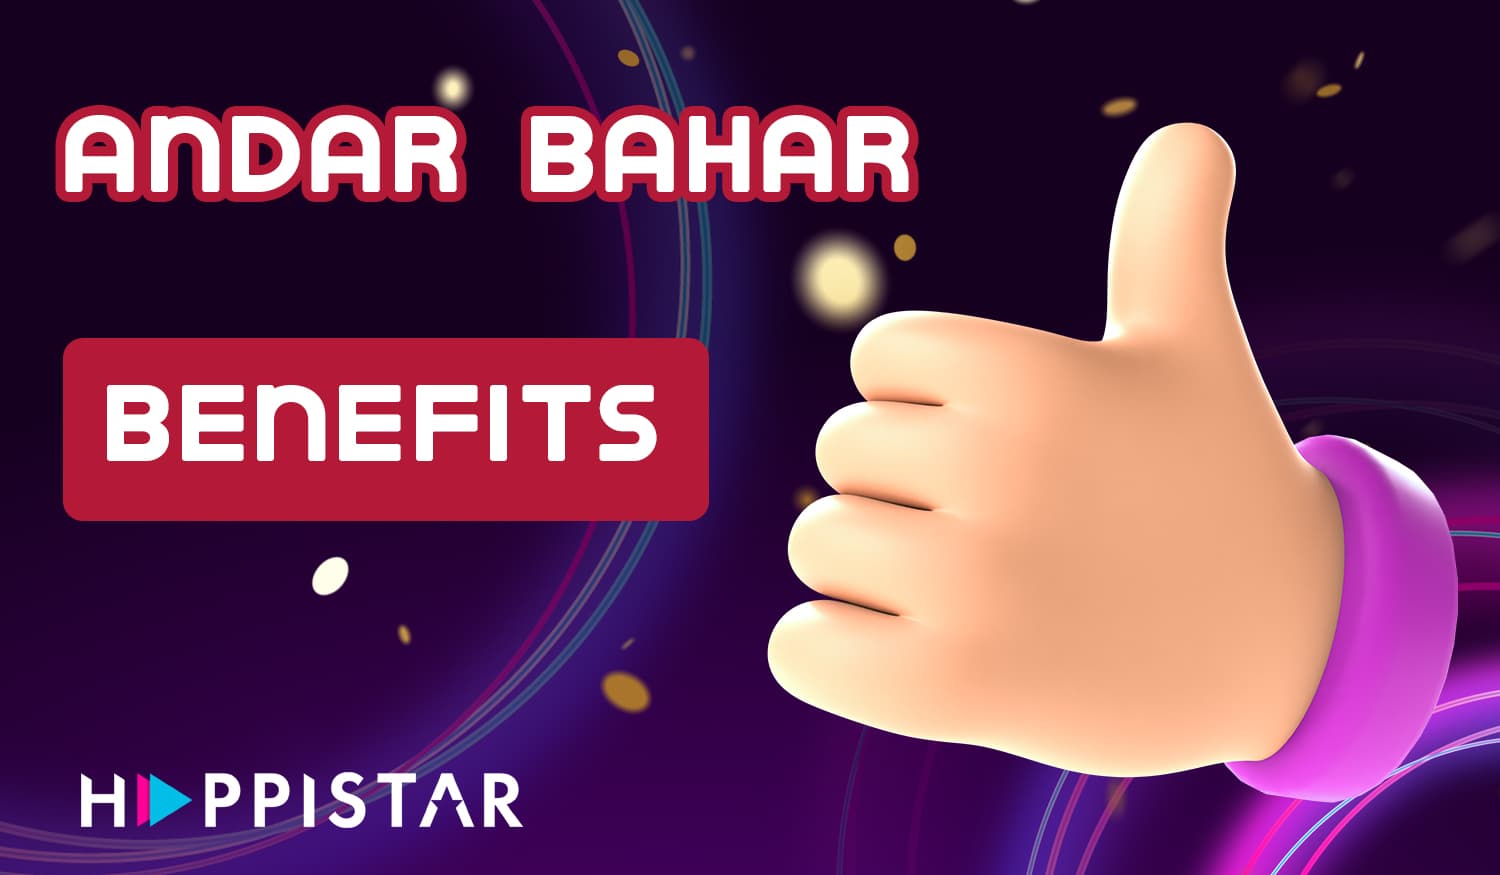 What are the advantages of Happistar online casino for playing Andar Bahar games